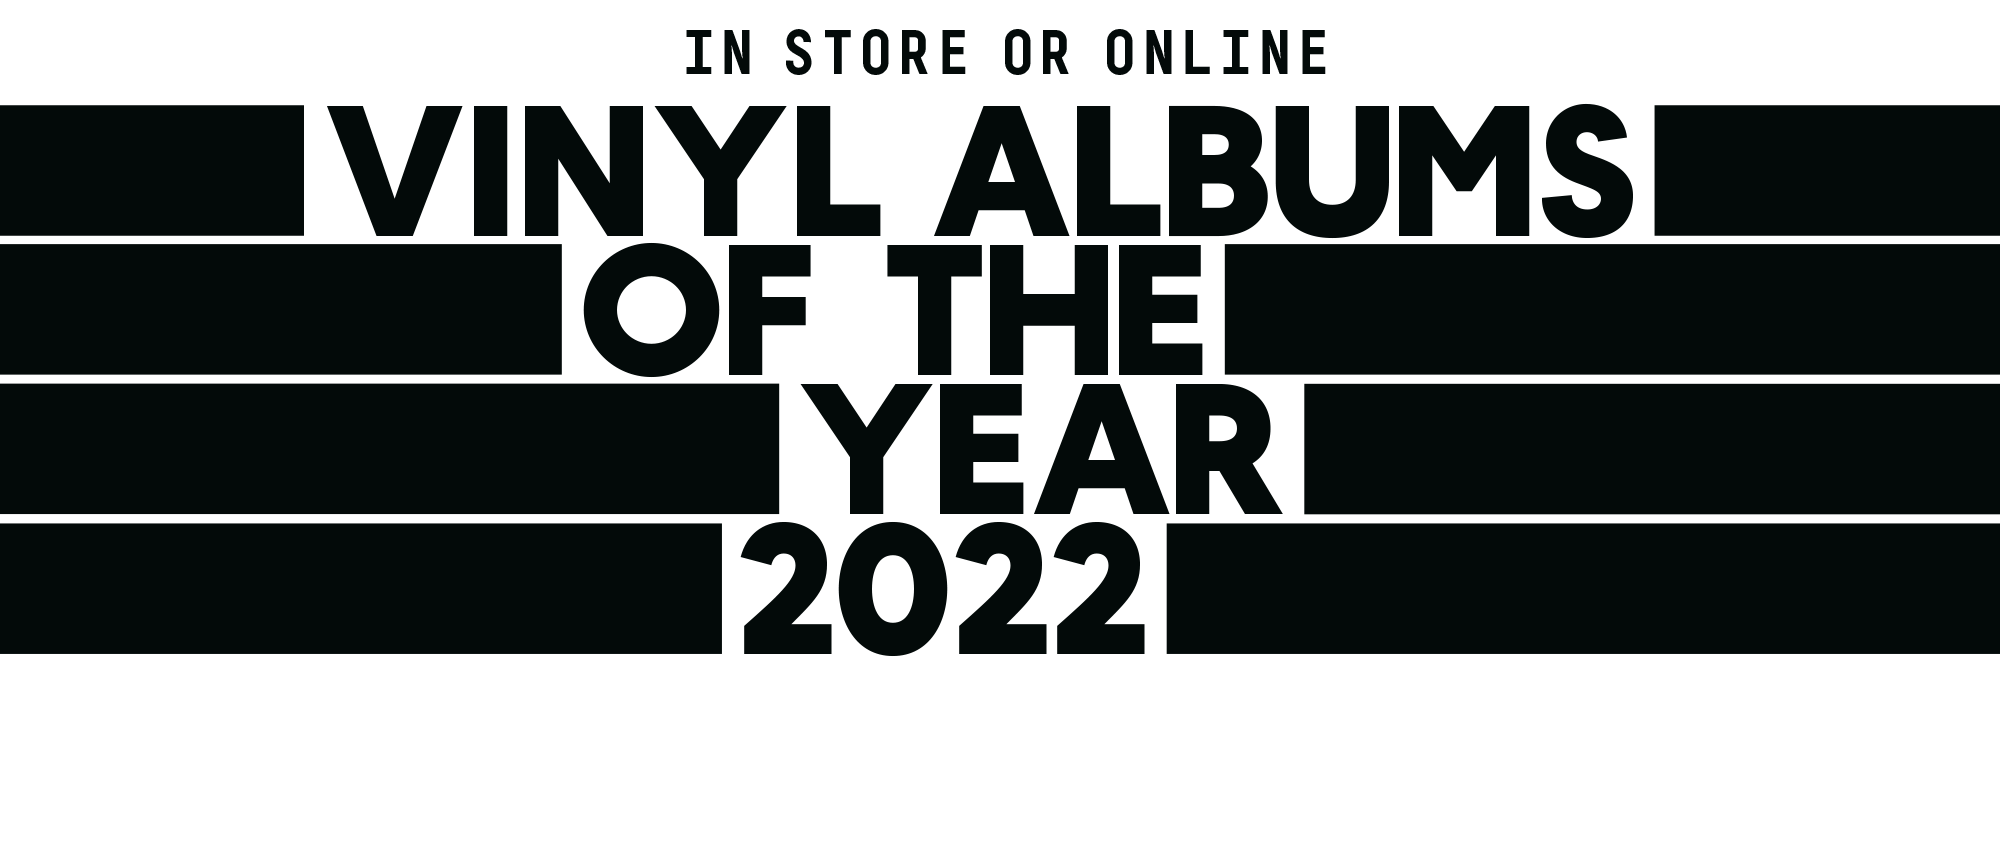 US Vinyl Albums of the Year 2022